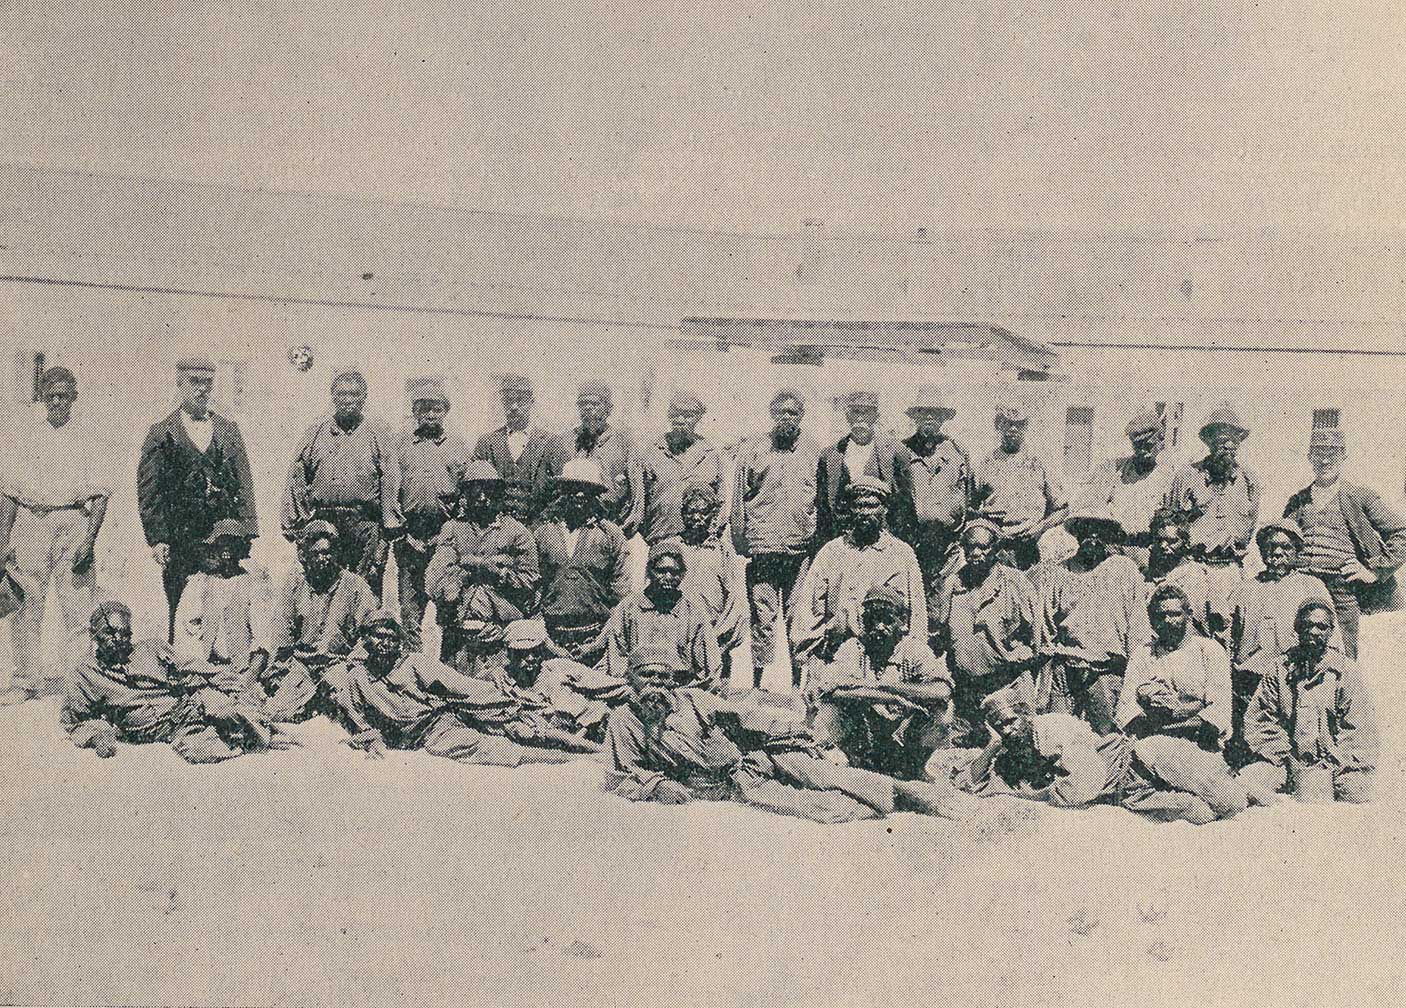 Group of unidentified prisoners on Wadjemup, 1901